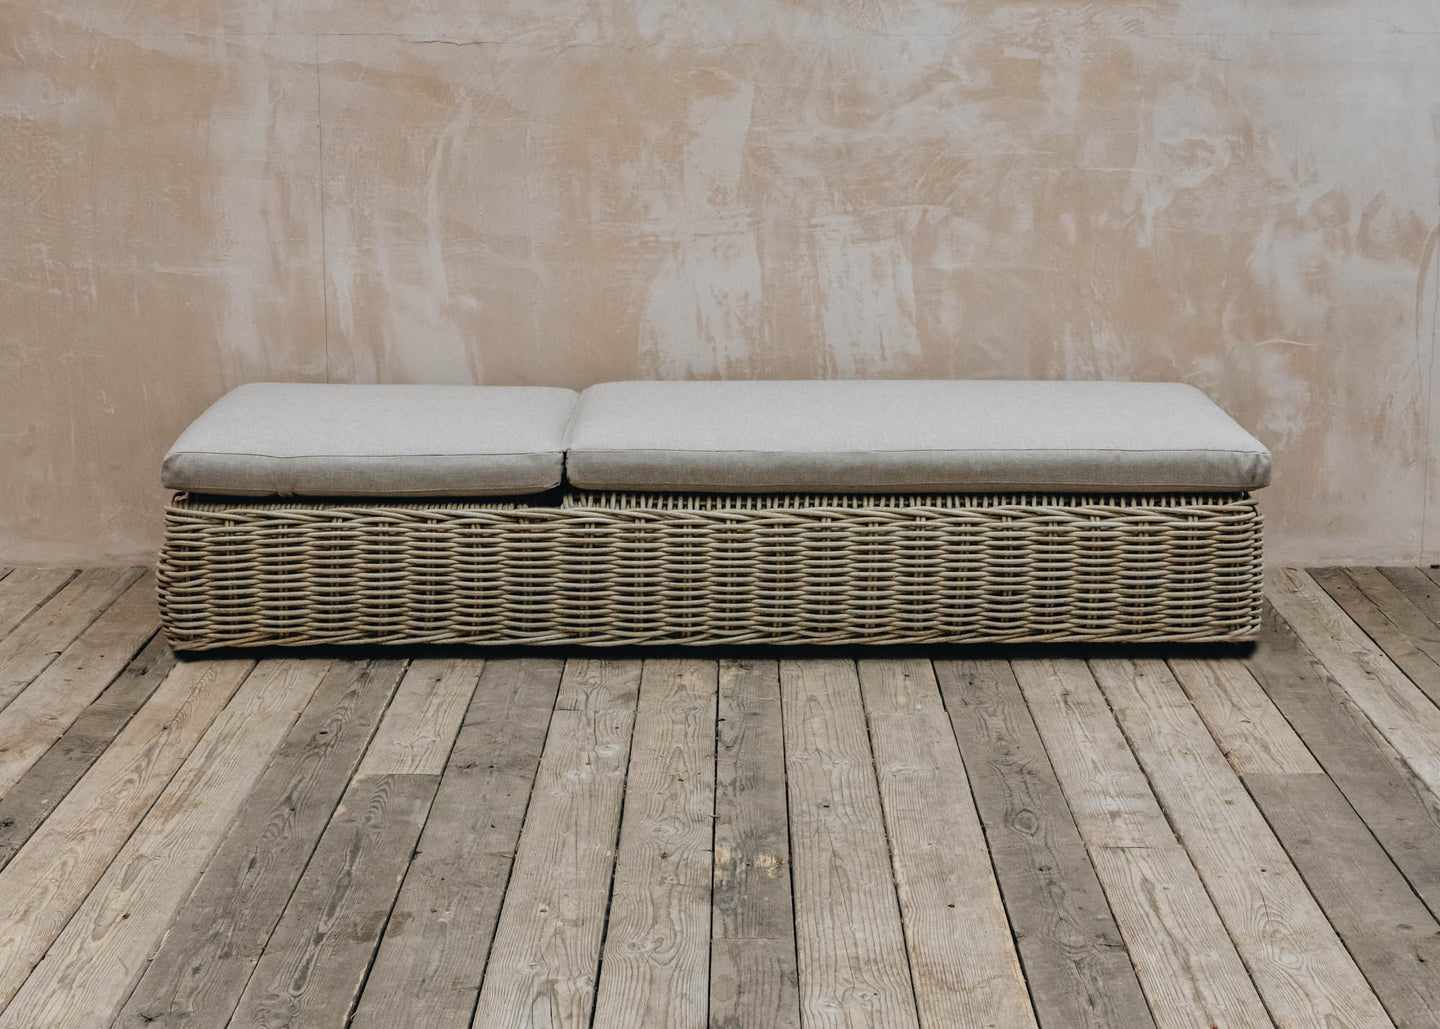 Pacific Lifestyle Garda Sunlounger in Natural Antique